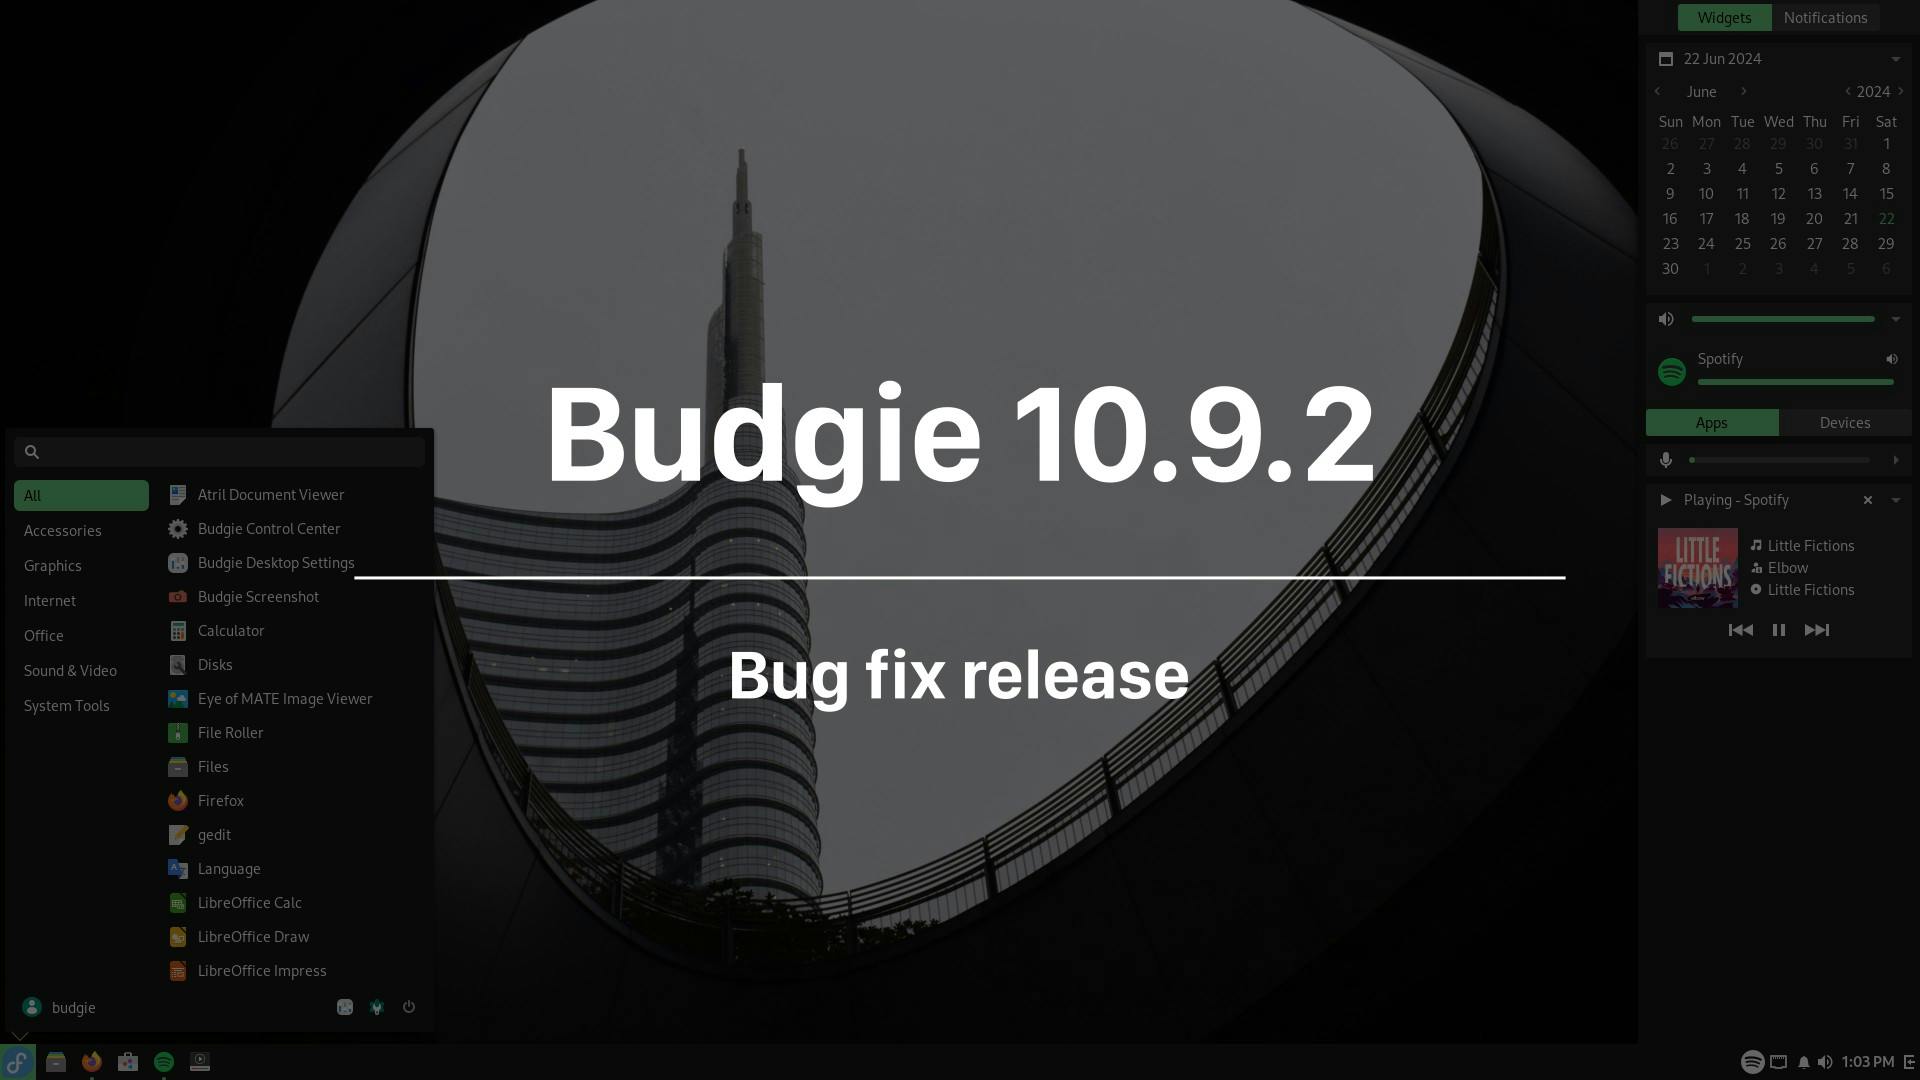 Budgie 10.9.2 Released